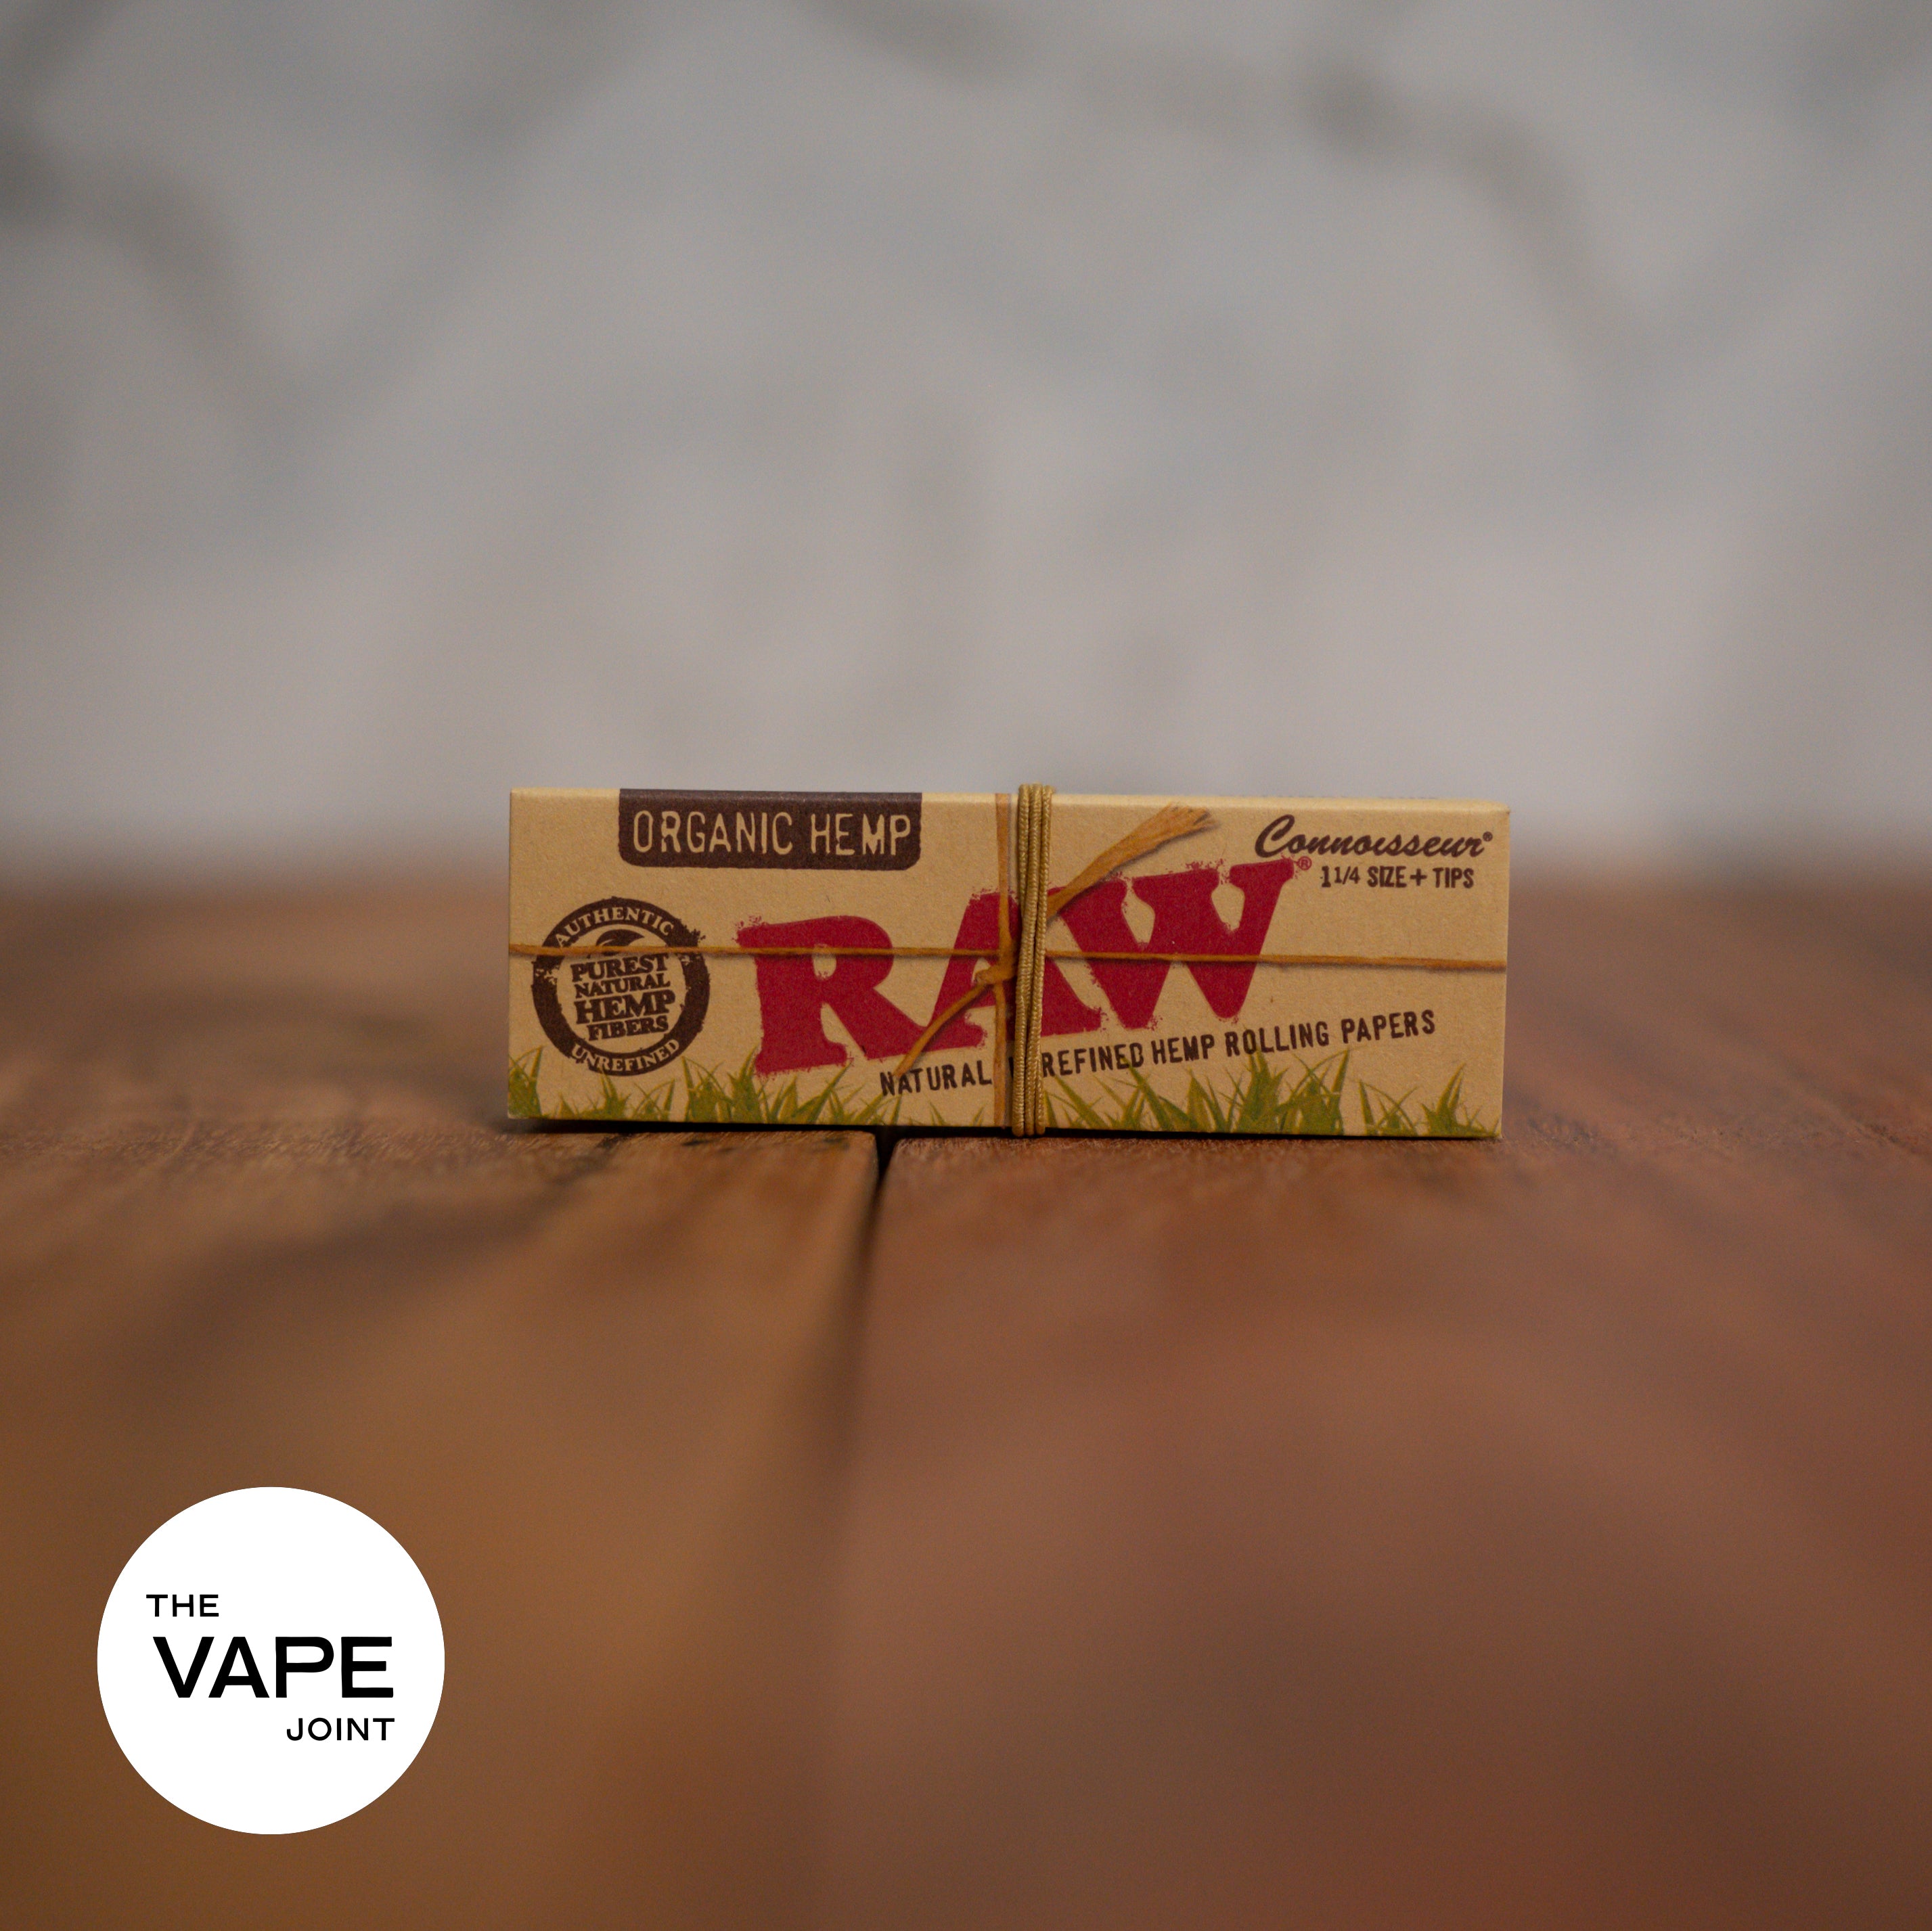 Raw Organic Hemp Connoisseur 1 1/4 Size With Tips